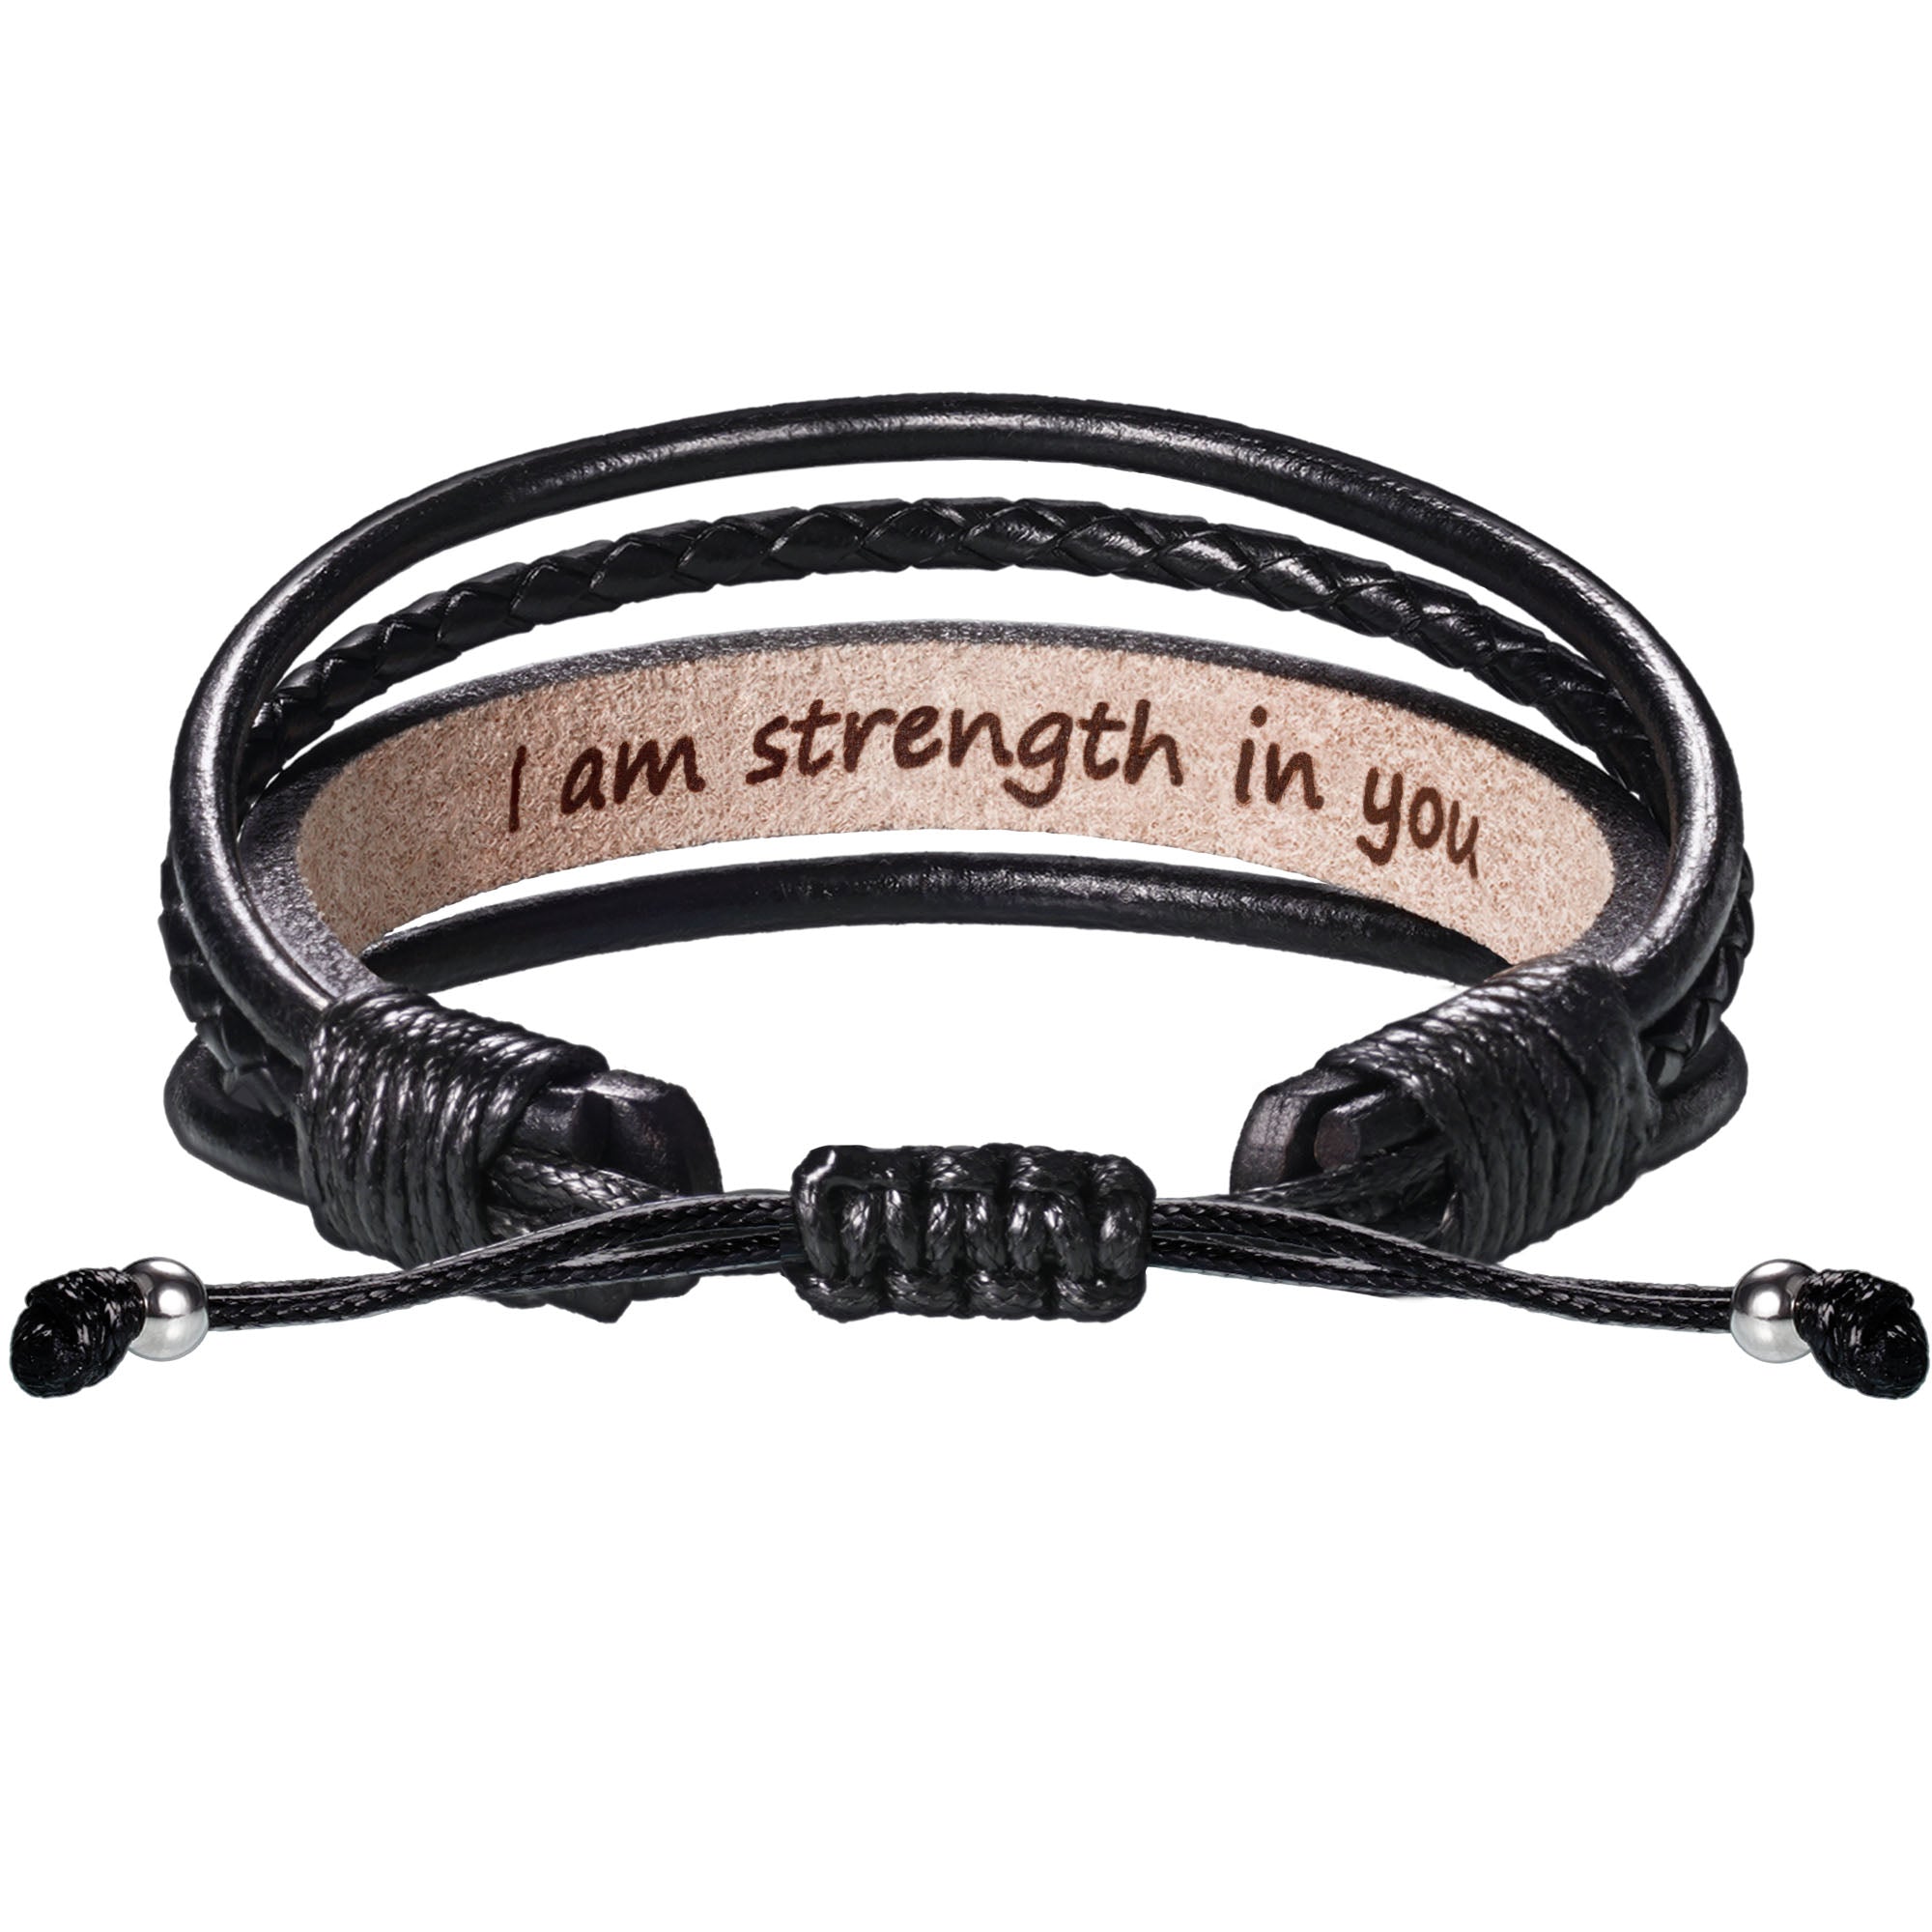 I am strength in you